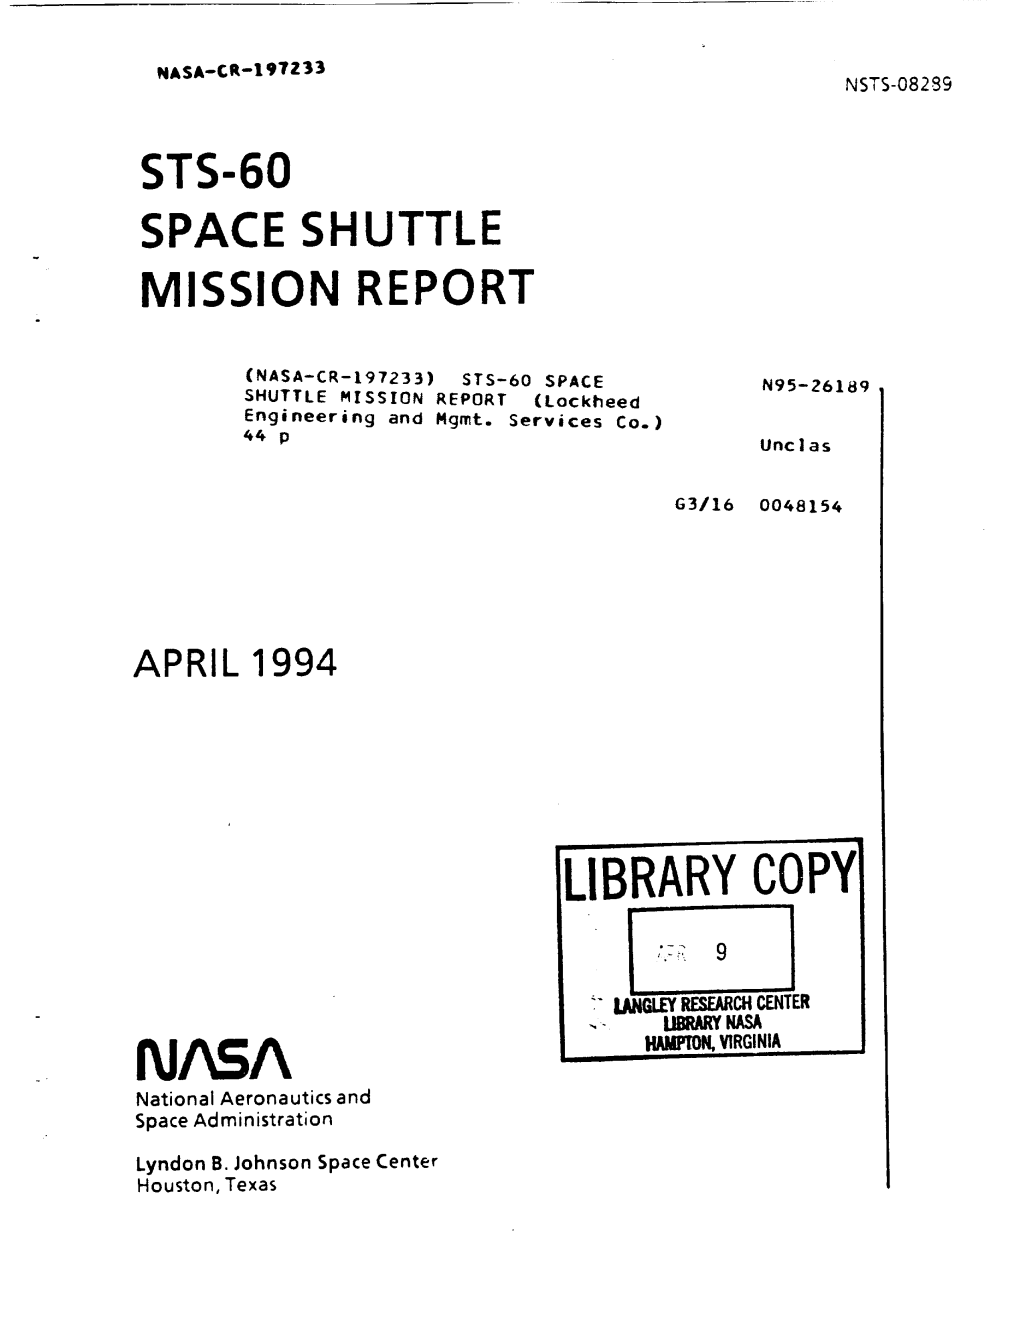 Sts-60 Space Shuttle Mission Report